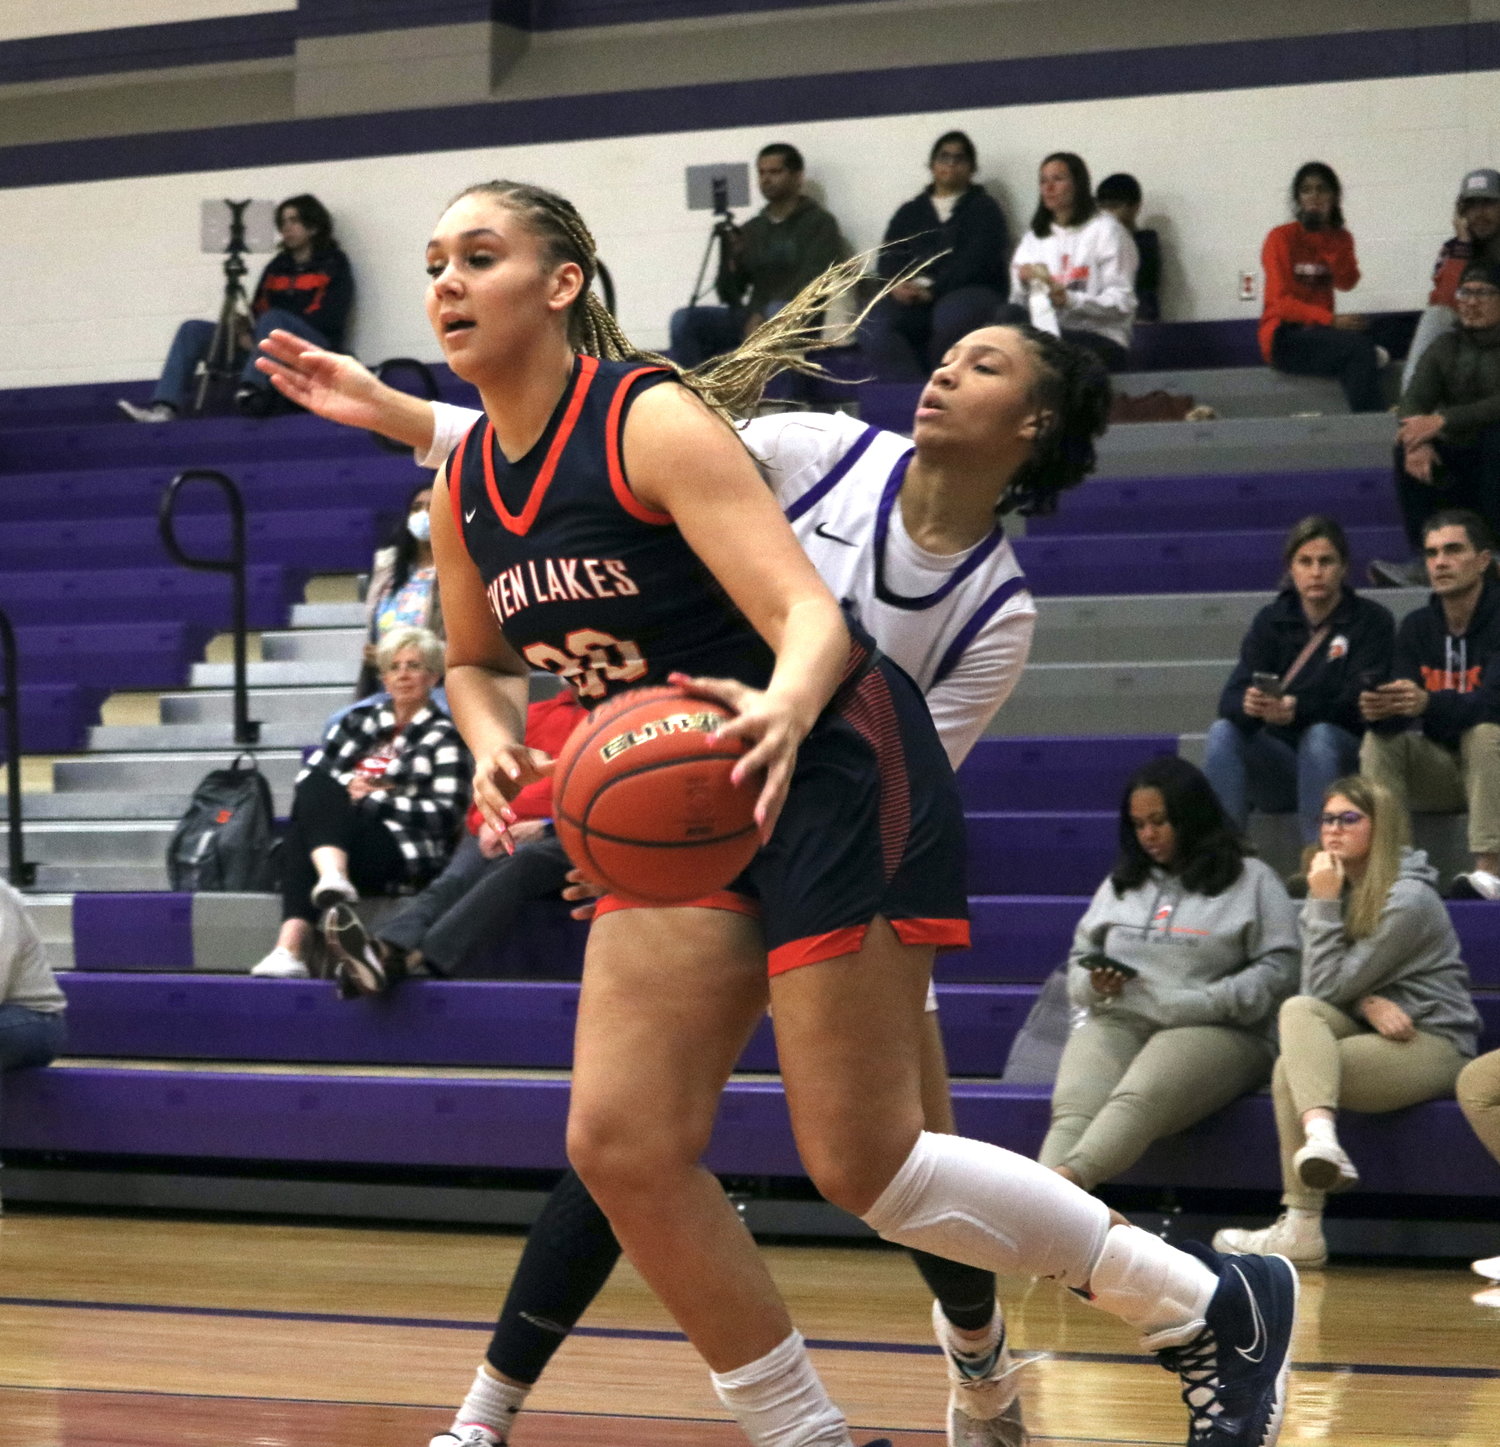 Justice Carlton drives past a defender during Friday's game between Seven Lakes and Morton Ranch at the Morton Ranch gym.